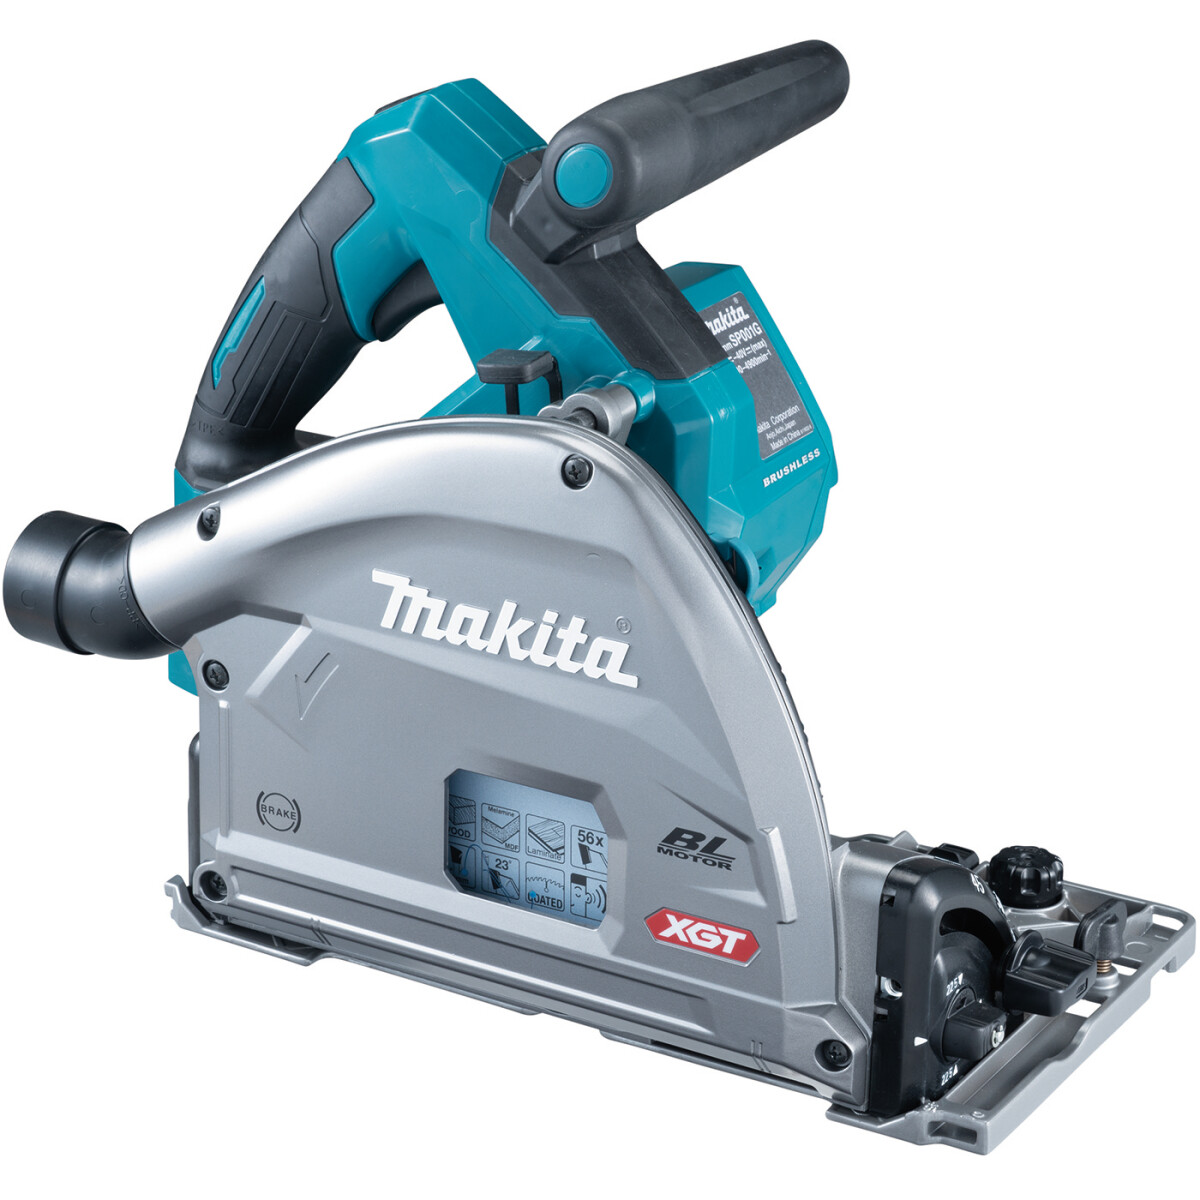 Makita SP001GZ03 Body Only 40V XGT Brushless 165mm Plunge Saw from 